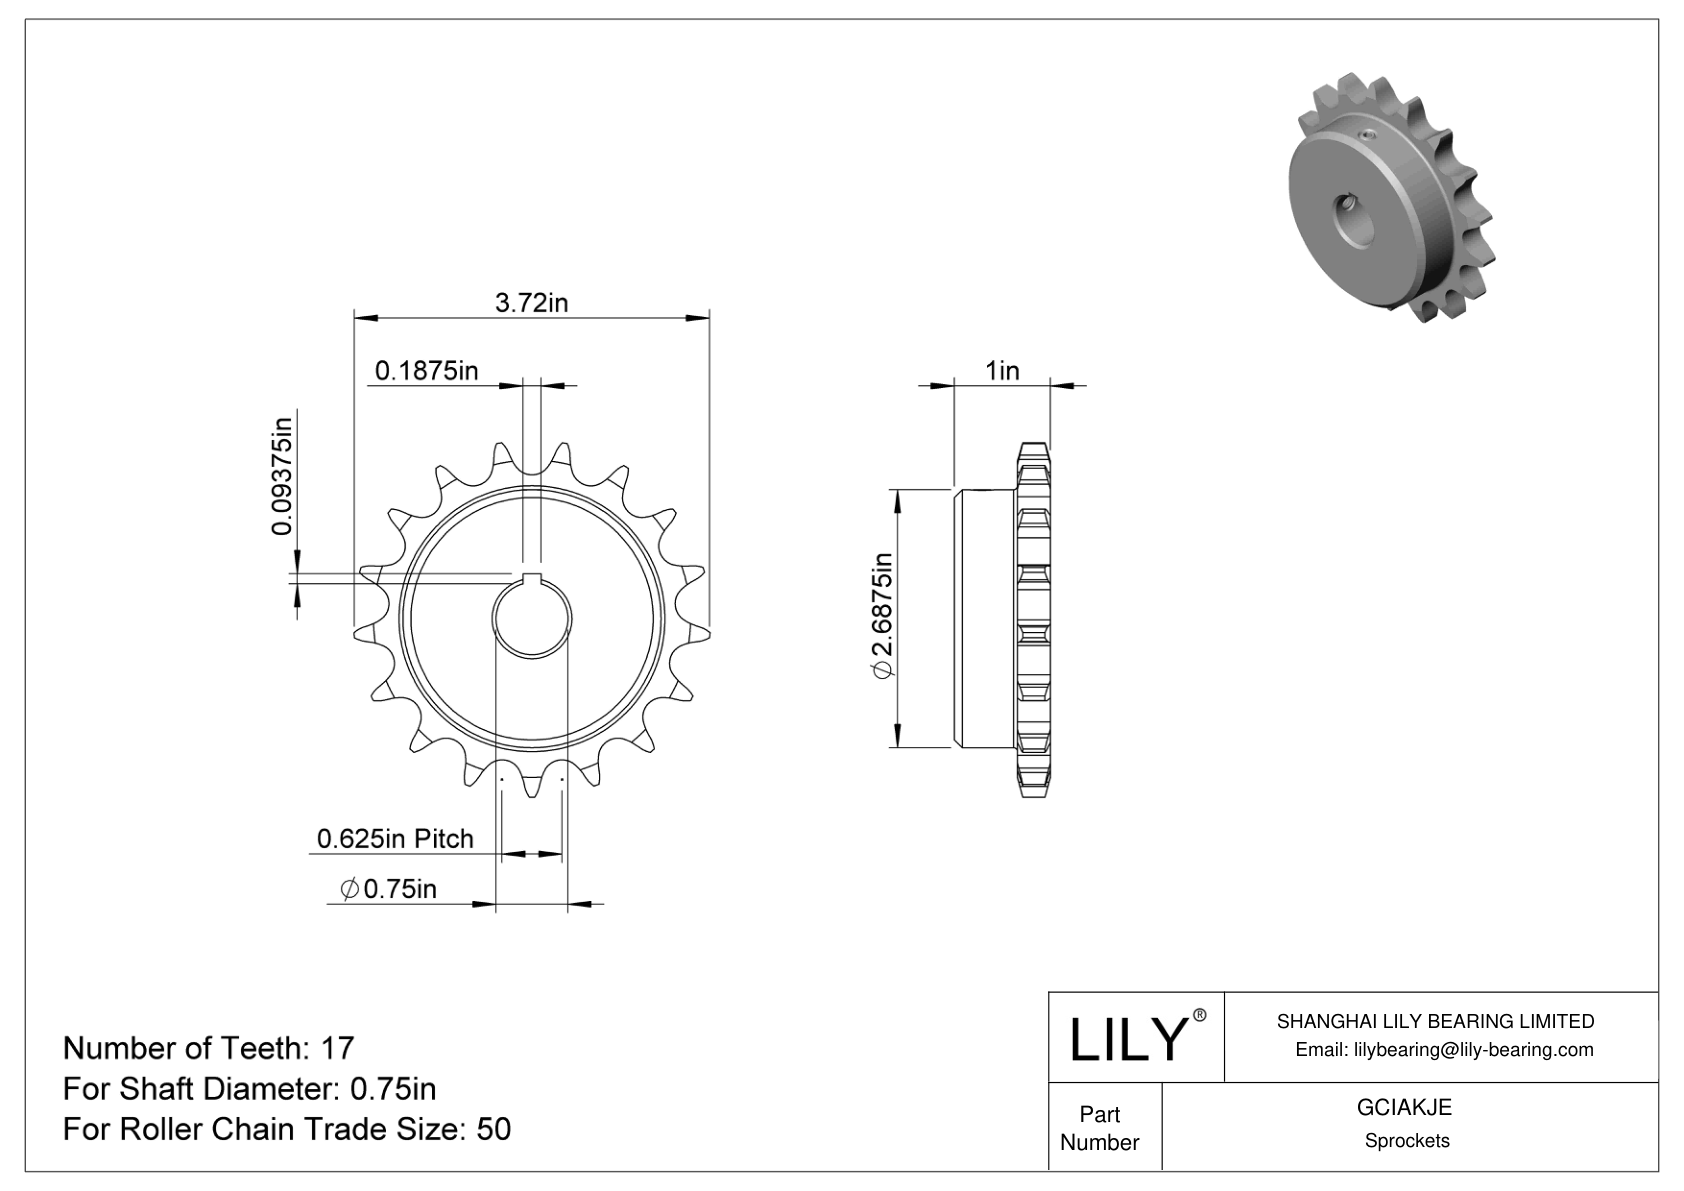 GCIAKJE Sprockets for ANSI Roller Chain cad drawing